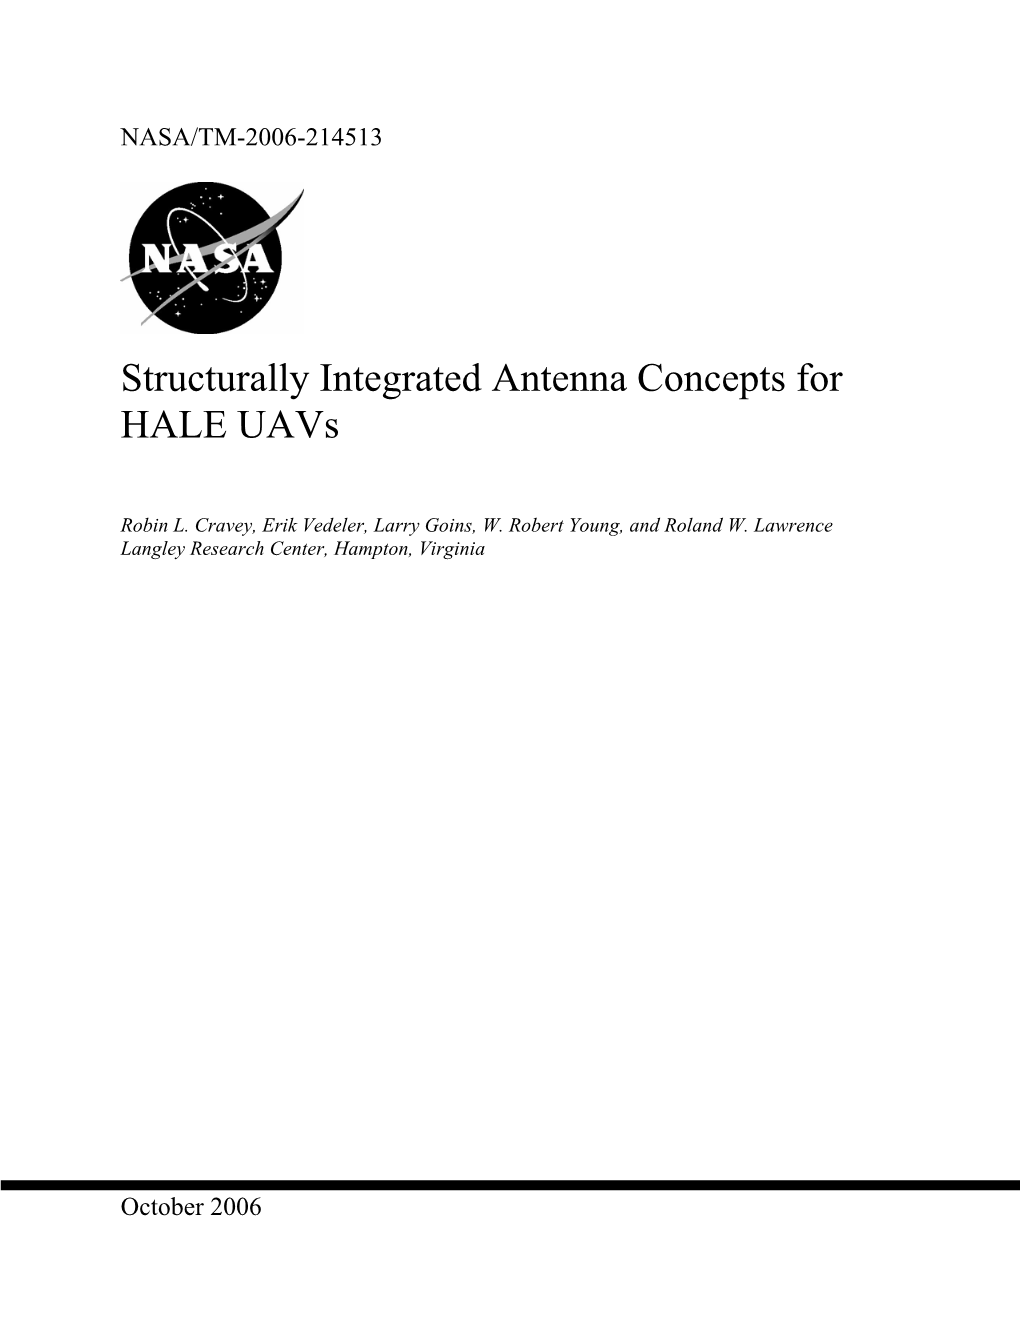 Structurally Integrated Antenna Concepts for HALE Uavs